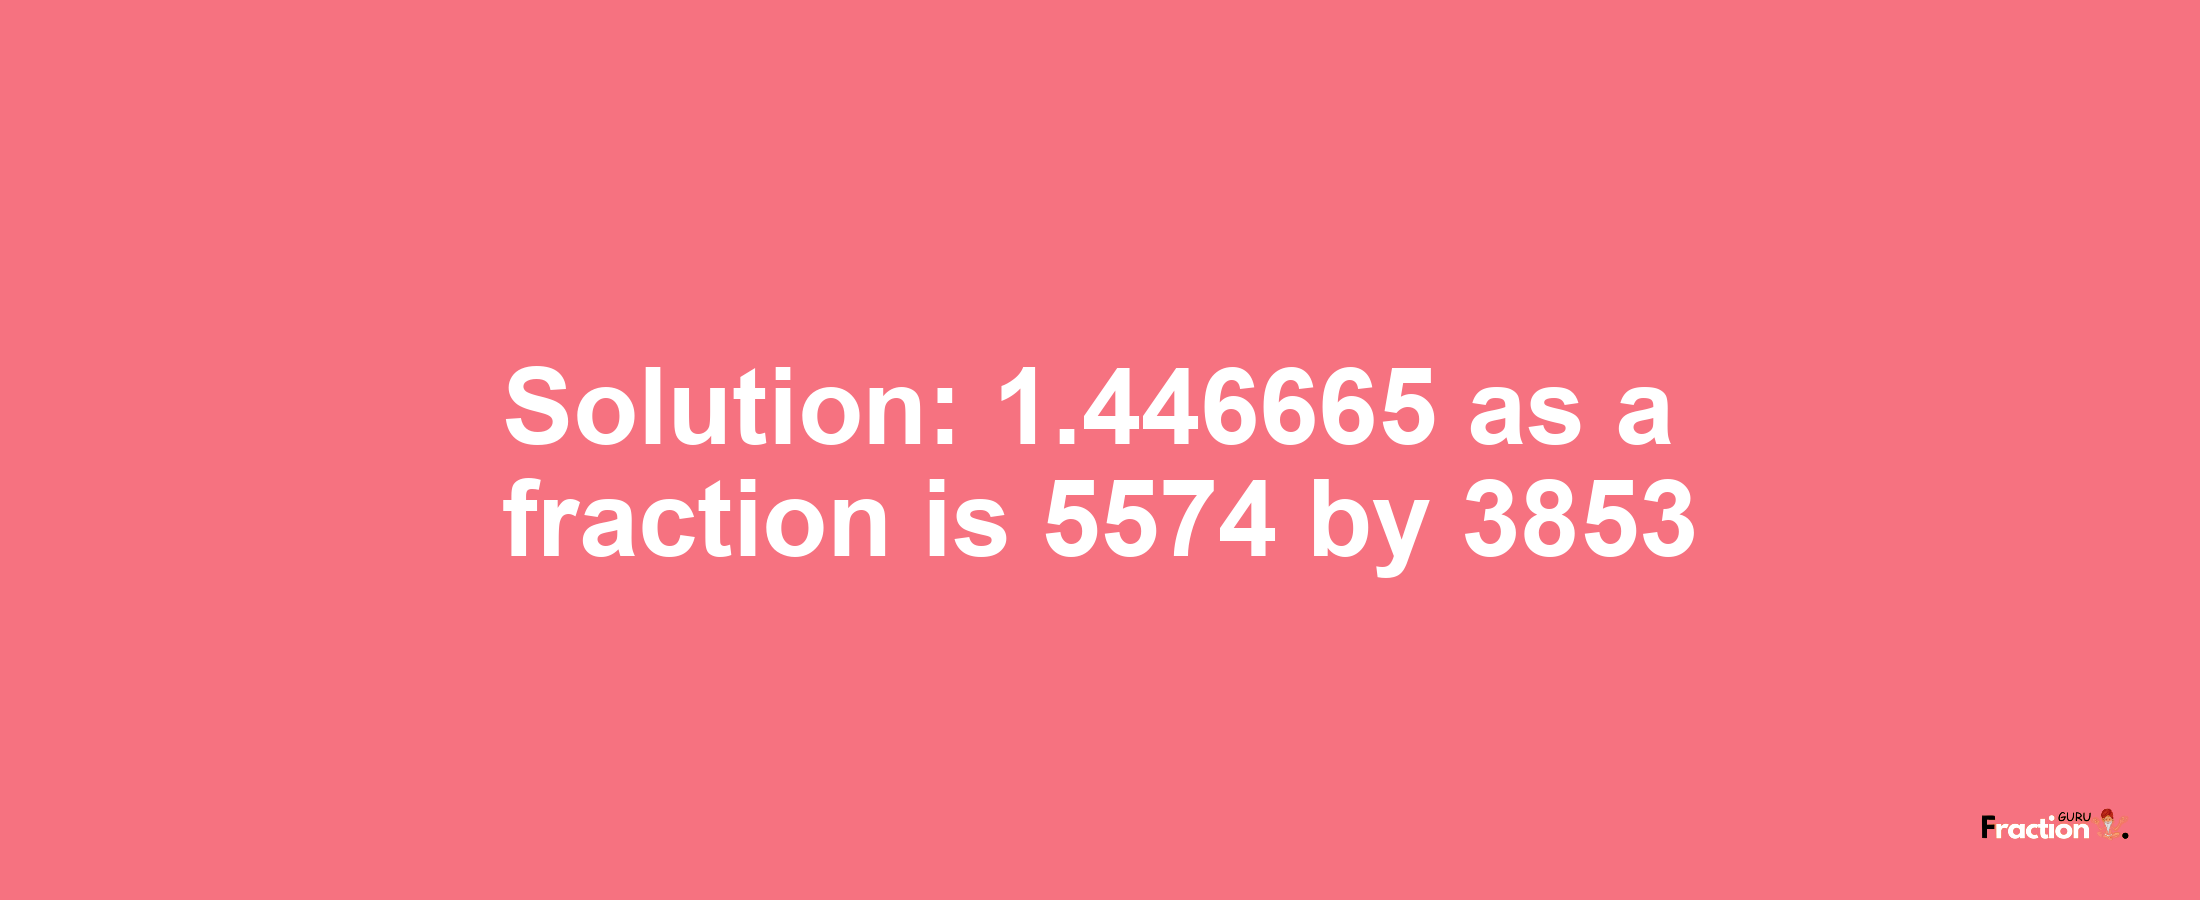 Solution:1.446665 as a fraction is 5574/3853